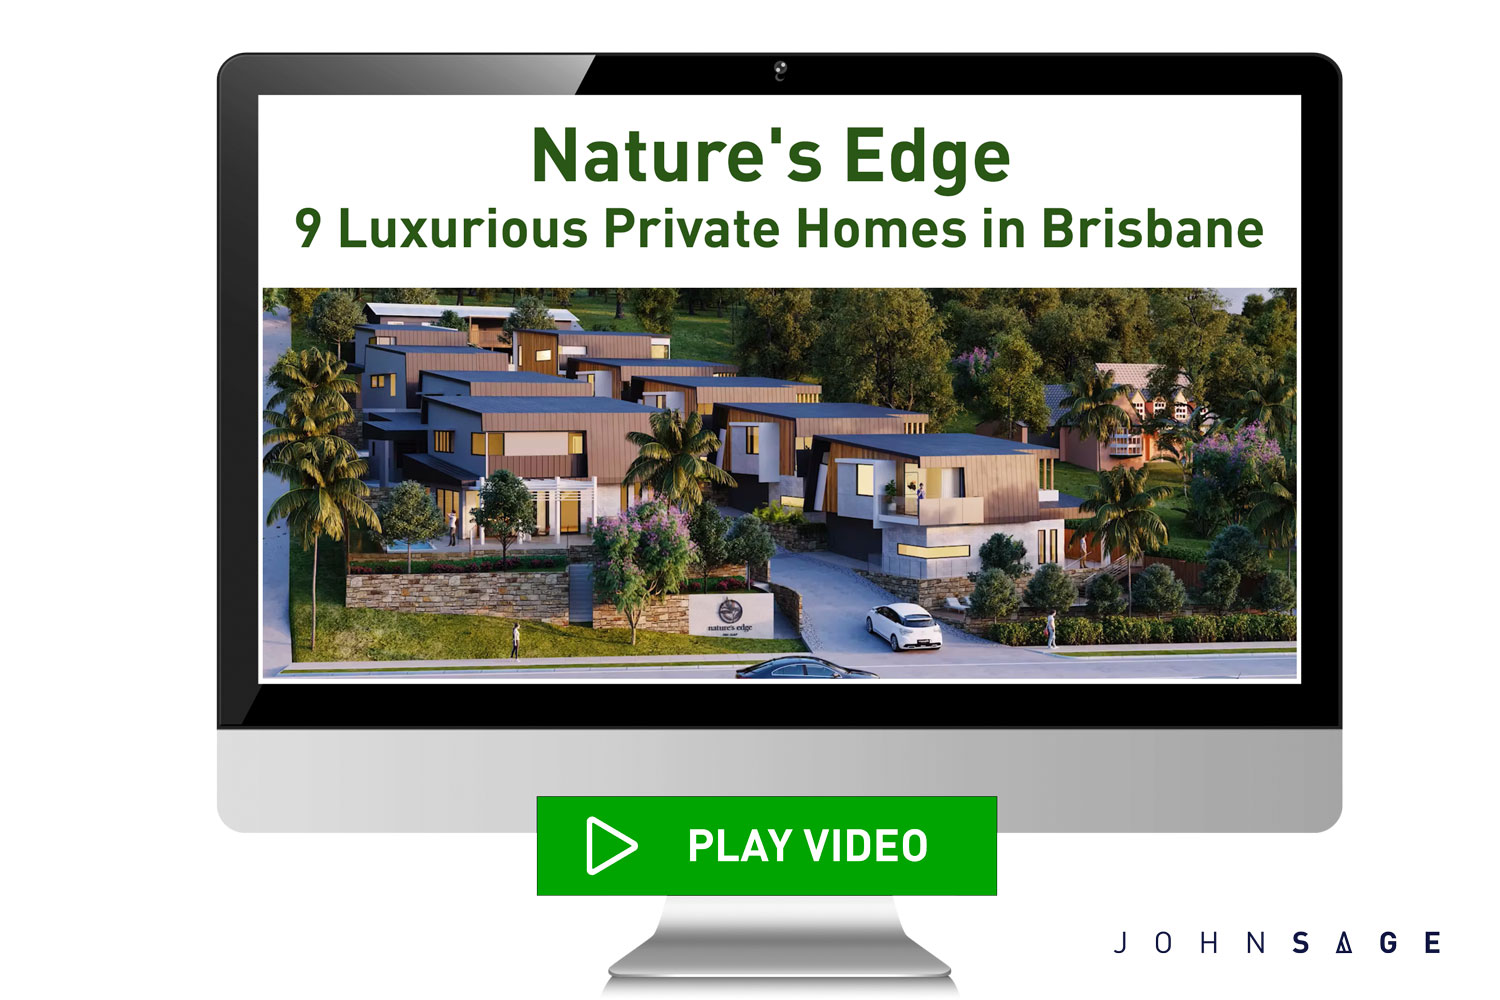 Nature's Edge. 9 Luxurious Private Homes in Brisbane